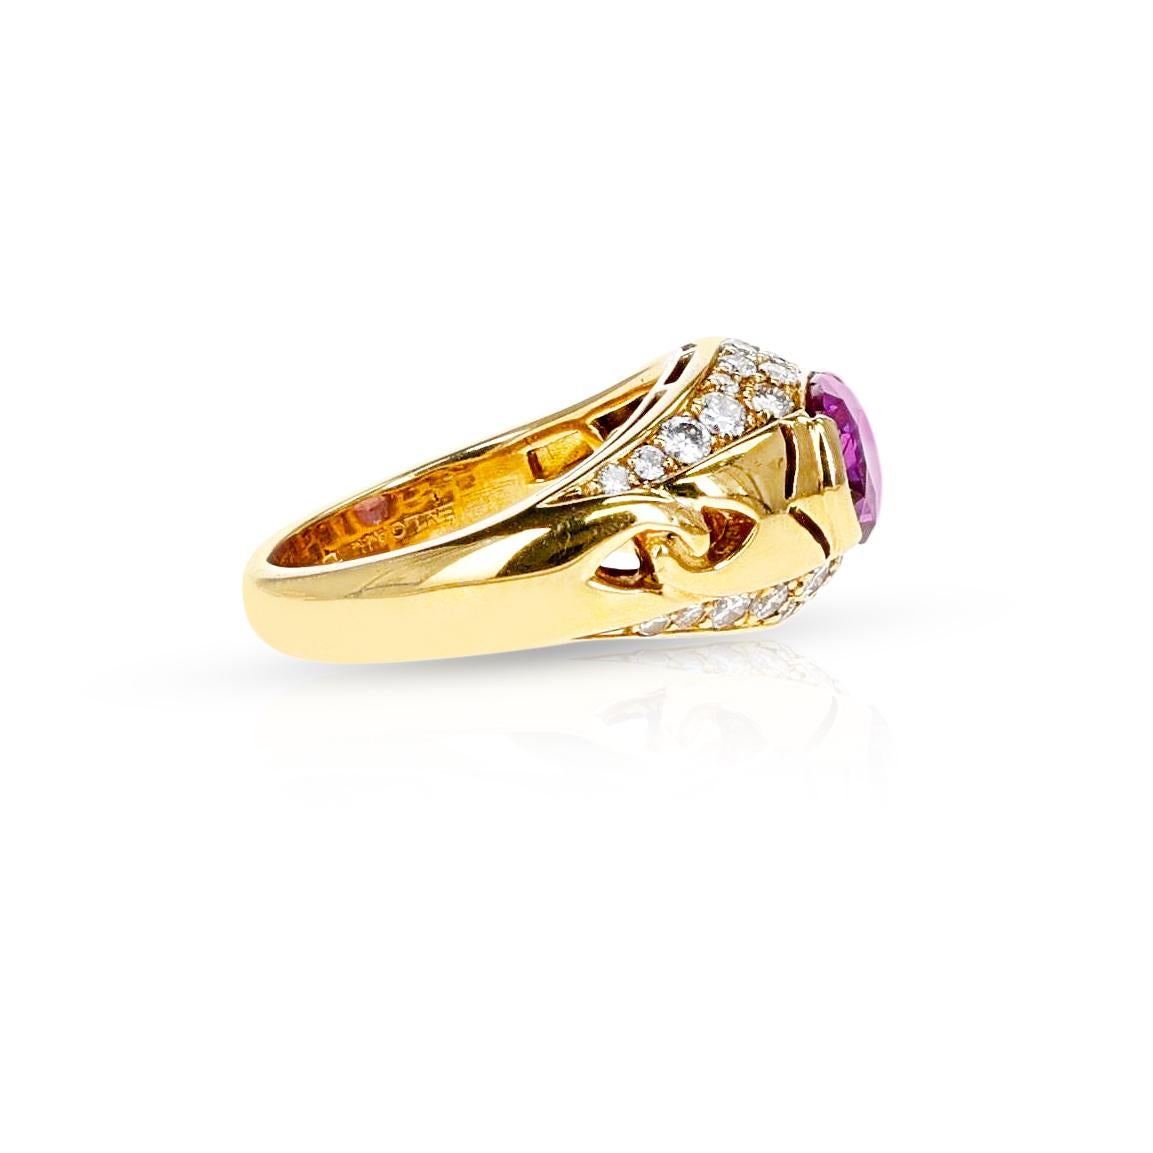 Bvlgari Italy Pink Sapphire and Diamond Ring, 18k In Excellent Condition For Sale In New York, NY